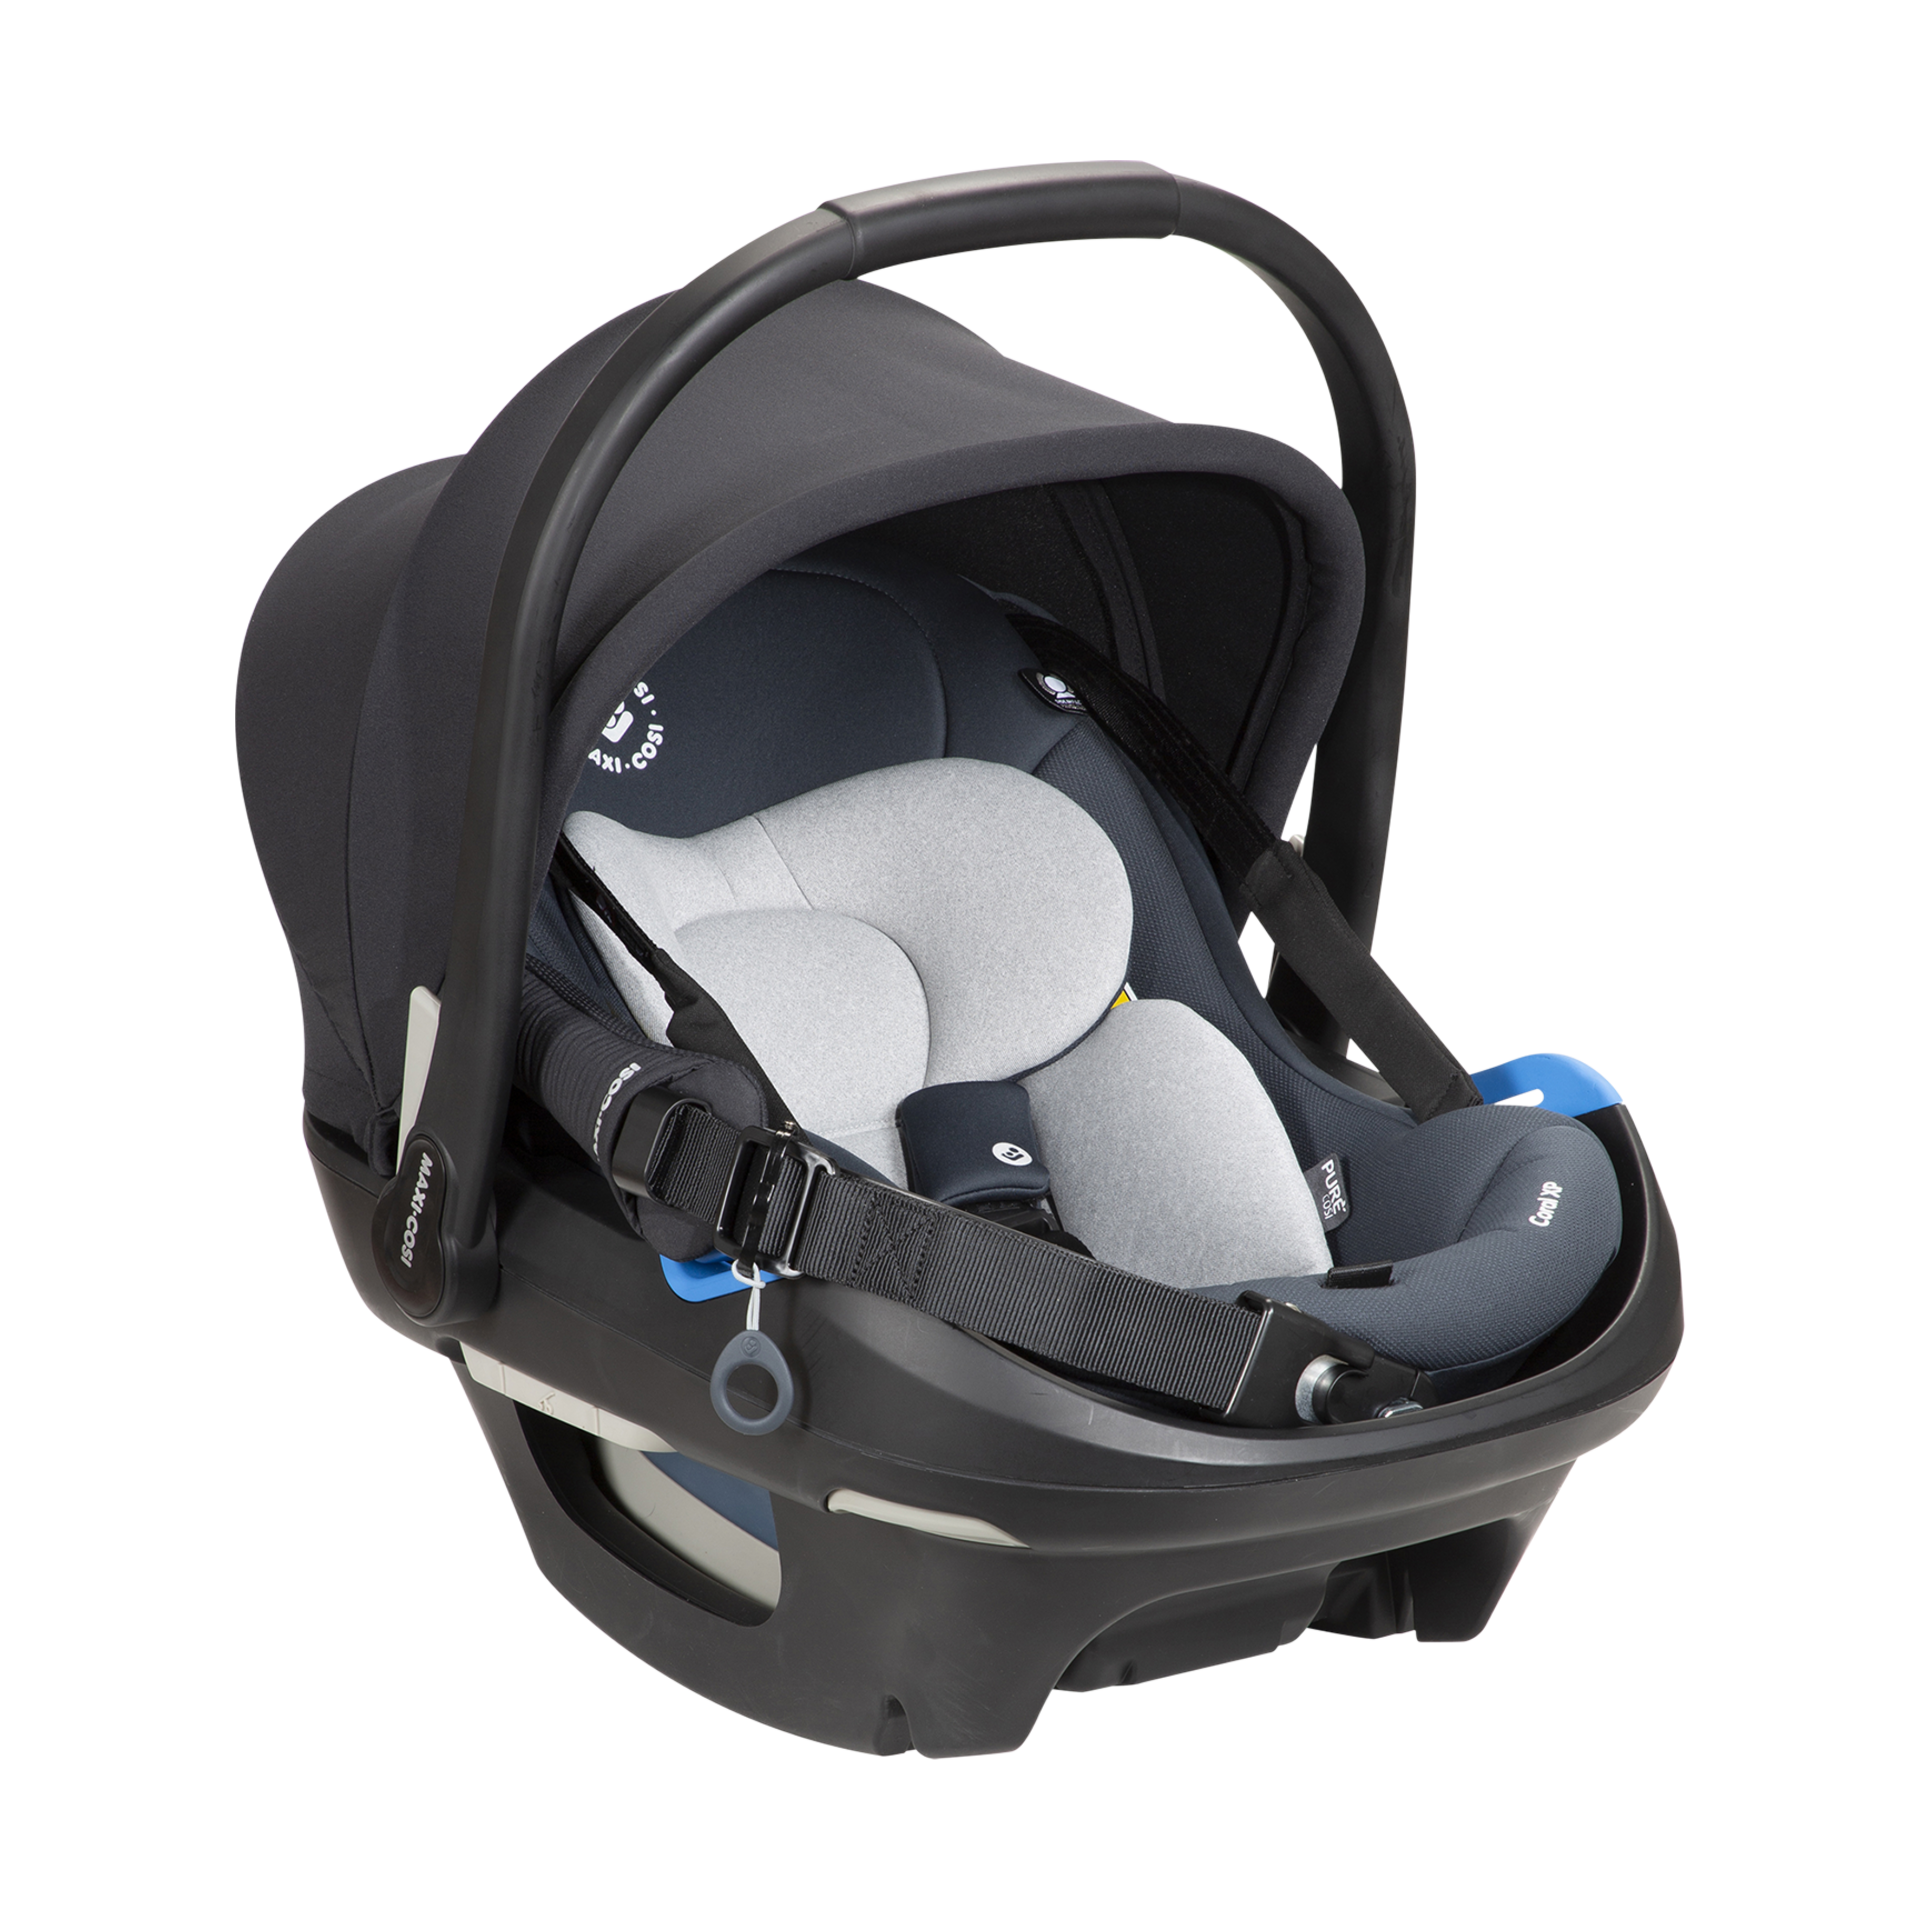 strollers compatible with maxi cosi car seat